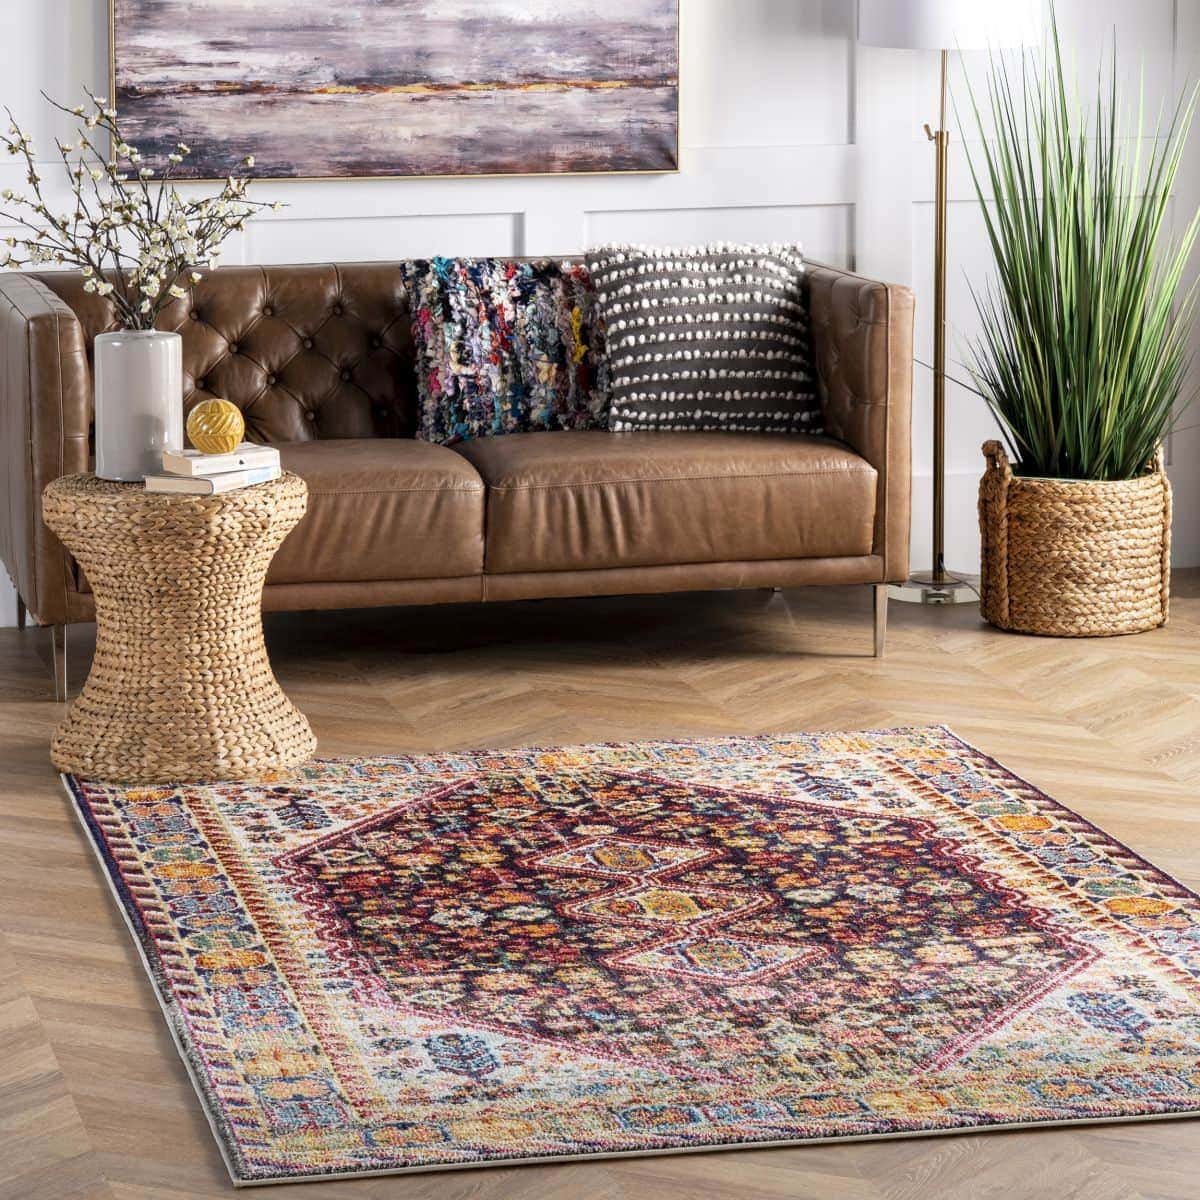 25 Gorgeous Rugs That Go With Brown Couches, Rugs That Go With Brown Leather Couch